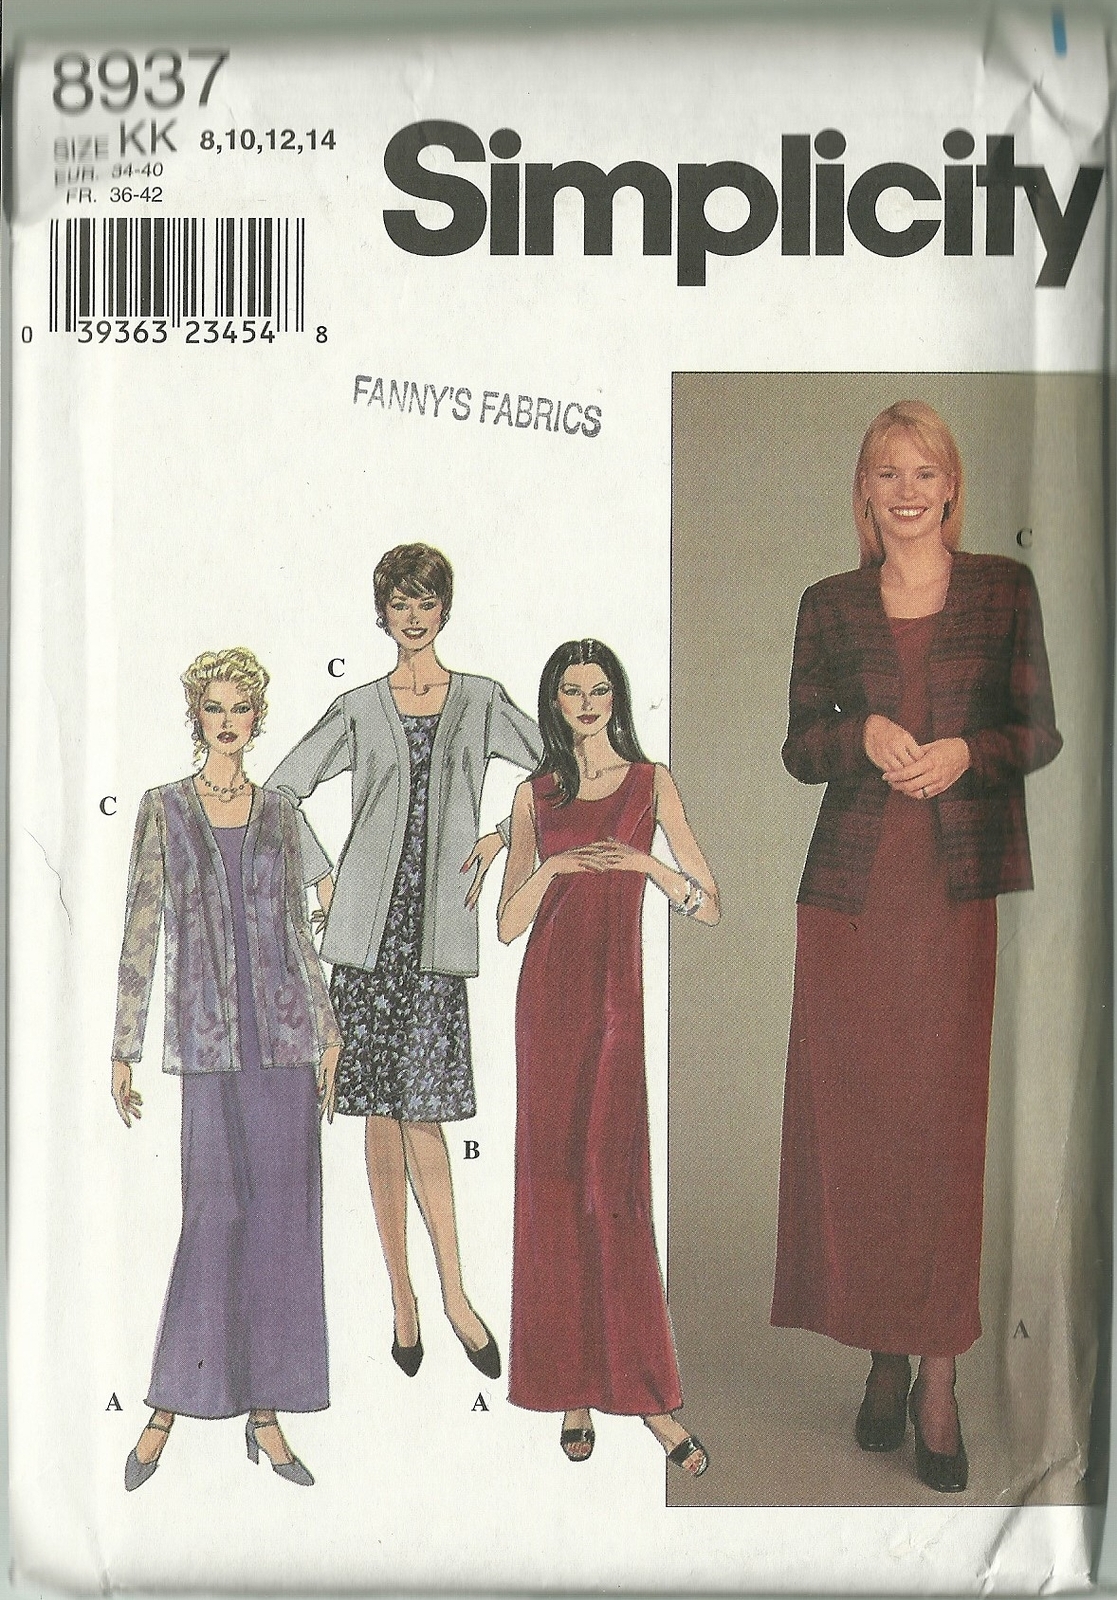 Simplicity Sewing Pattern 8937 Misses Womens Dress Jacket Size 8 10 12 14 New - $9.99